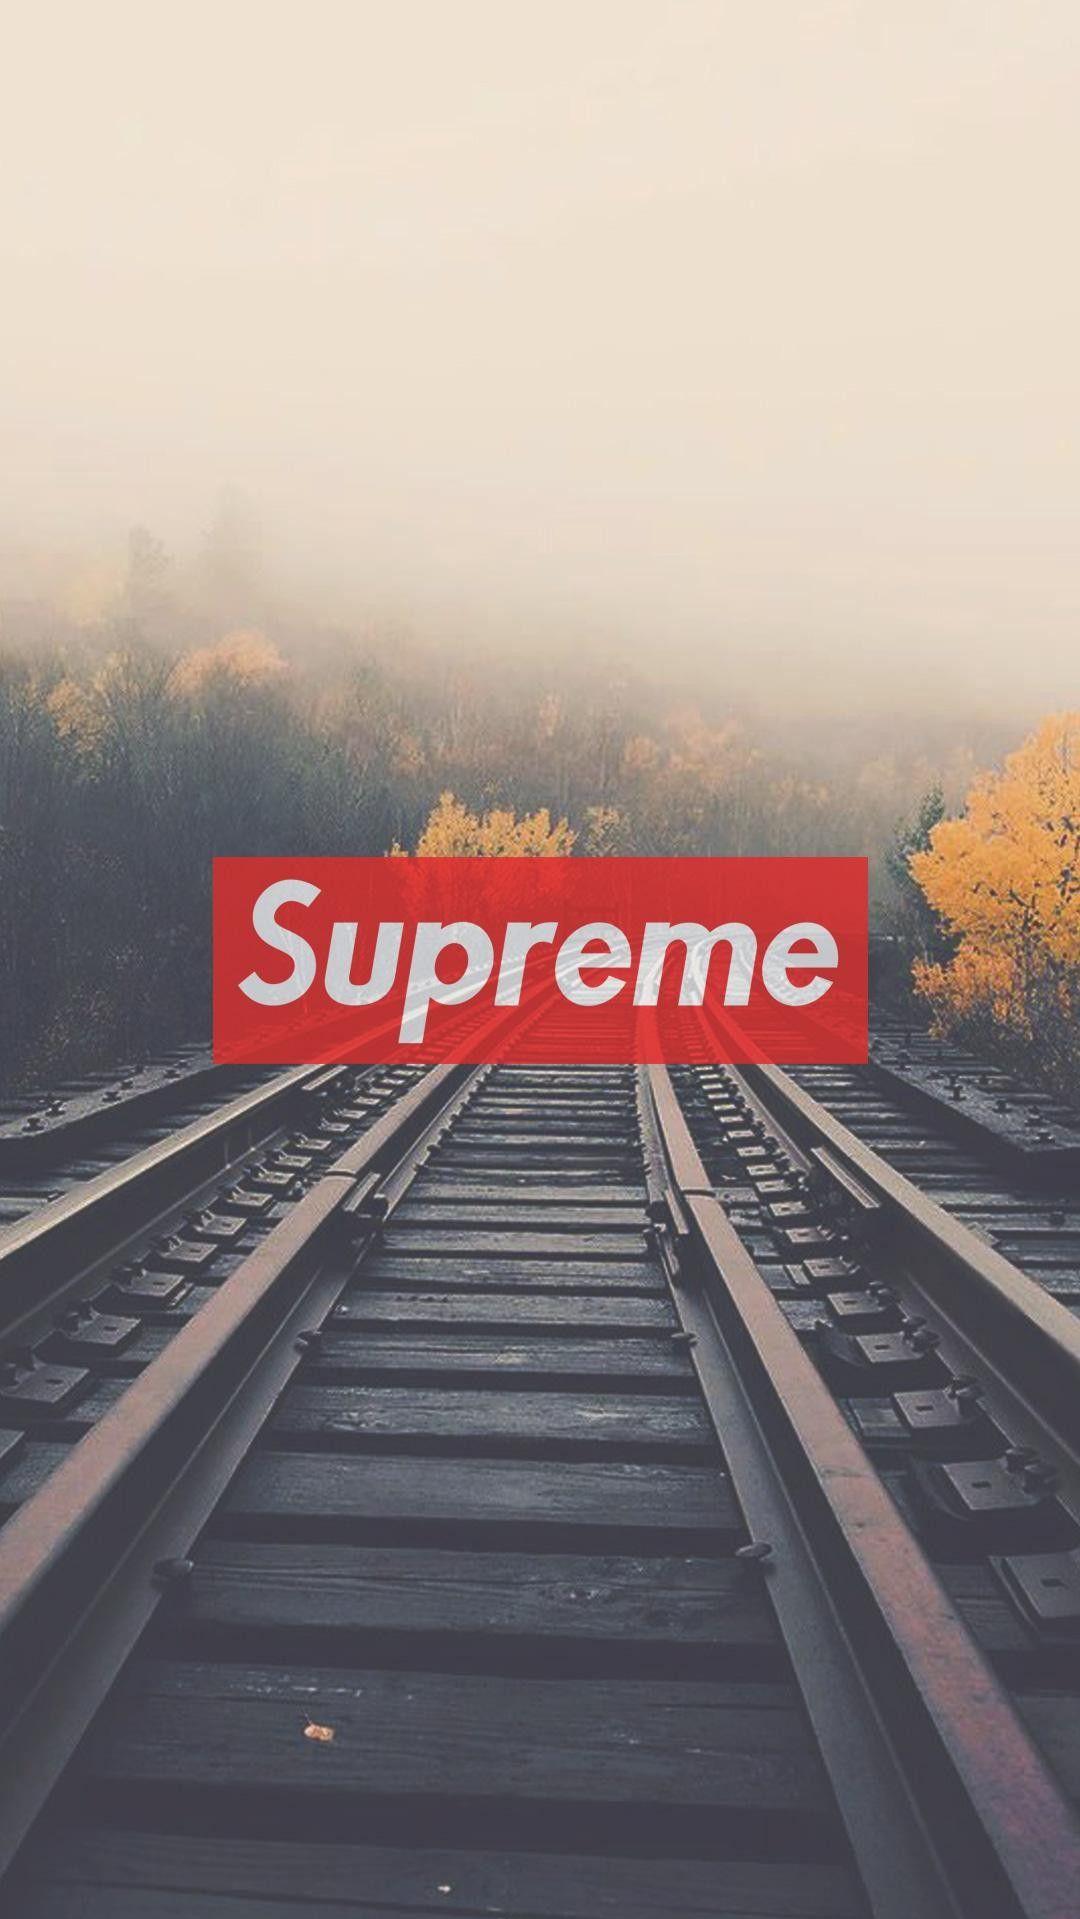 Follow The Board Hypebeast Wallpaper By Nixxboi For More